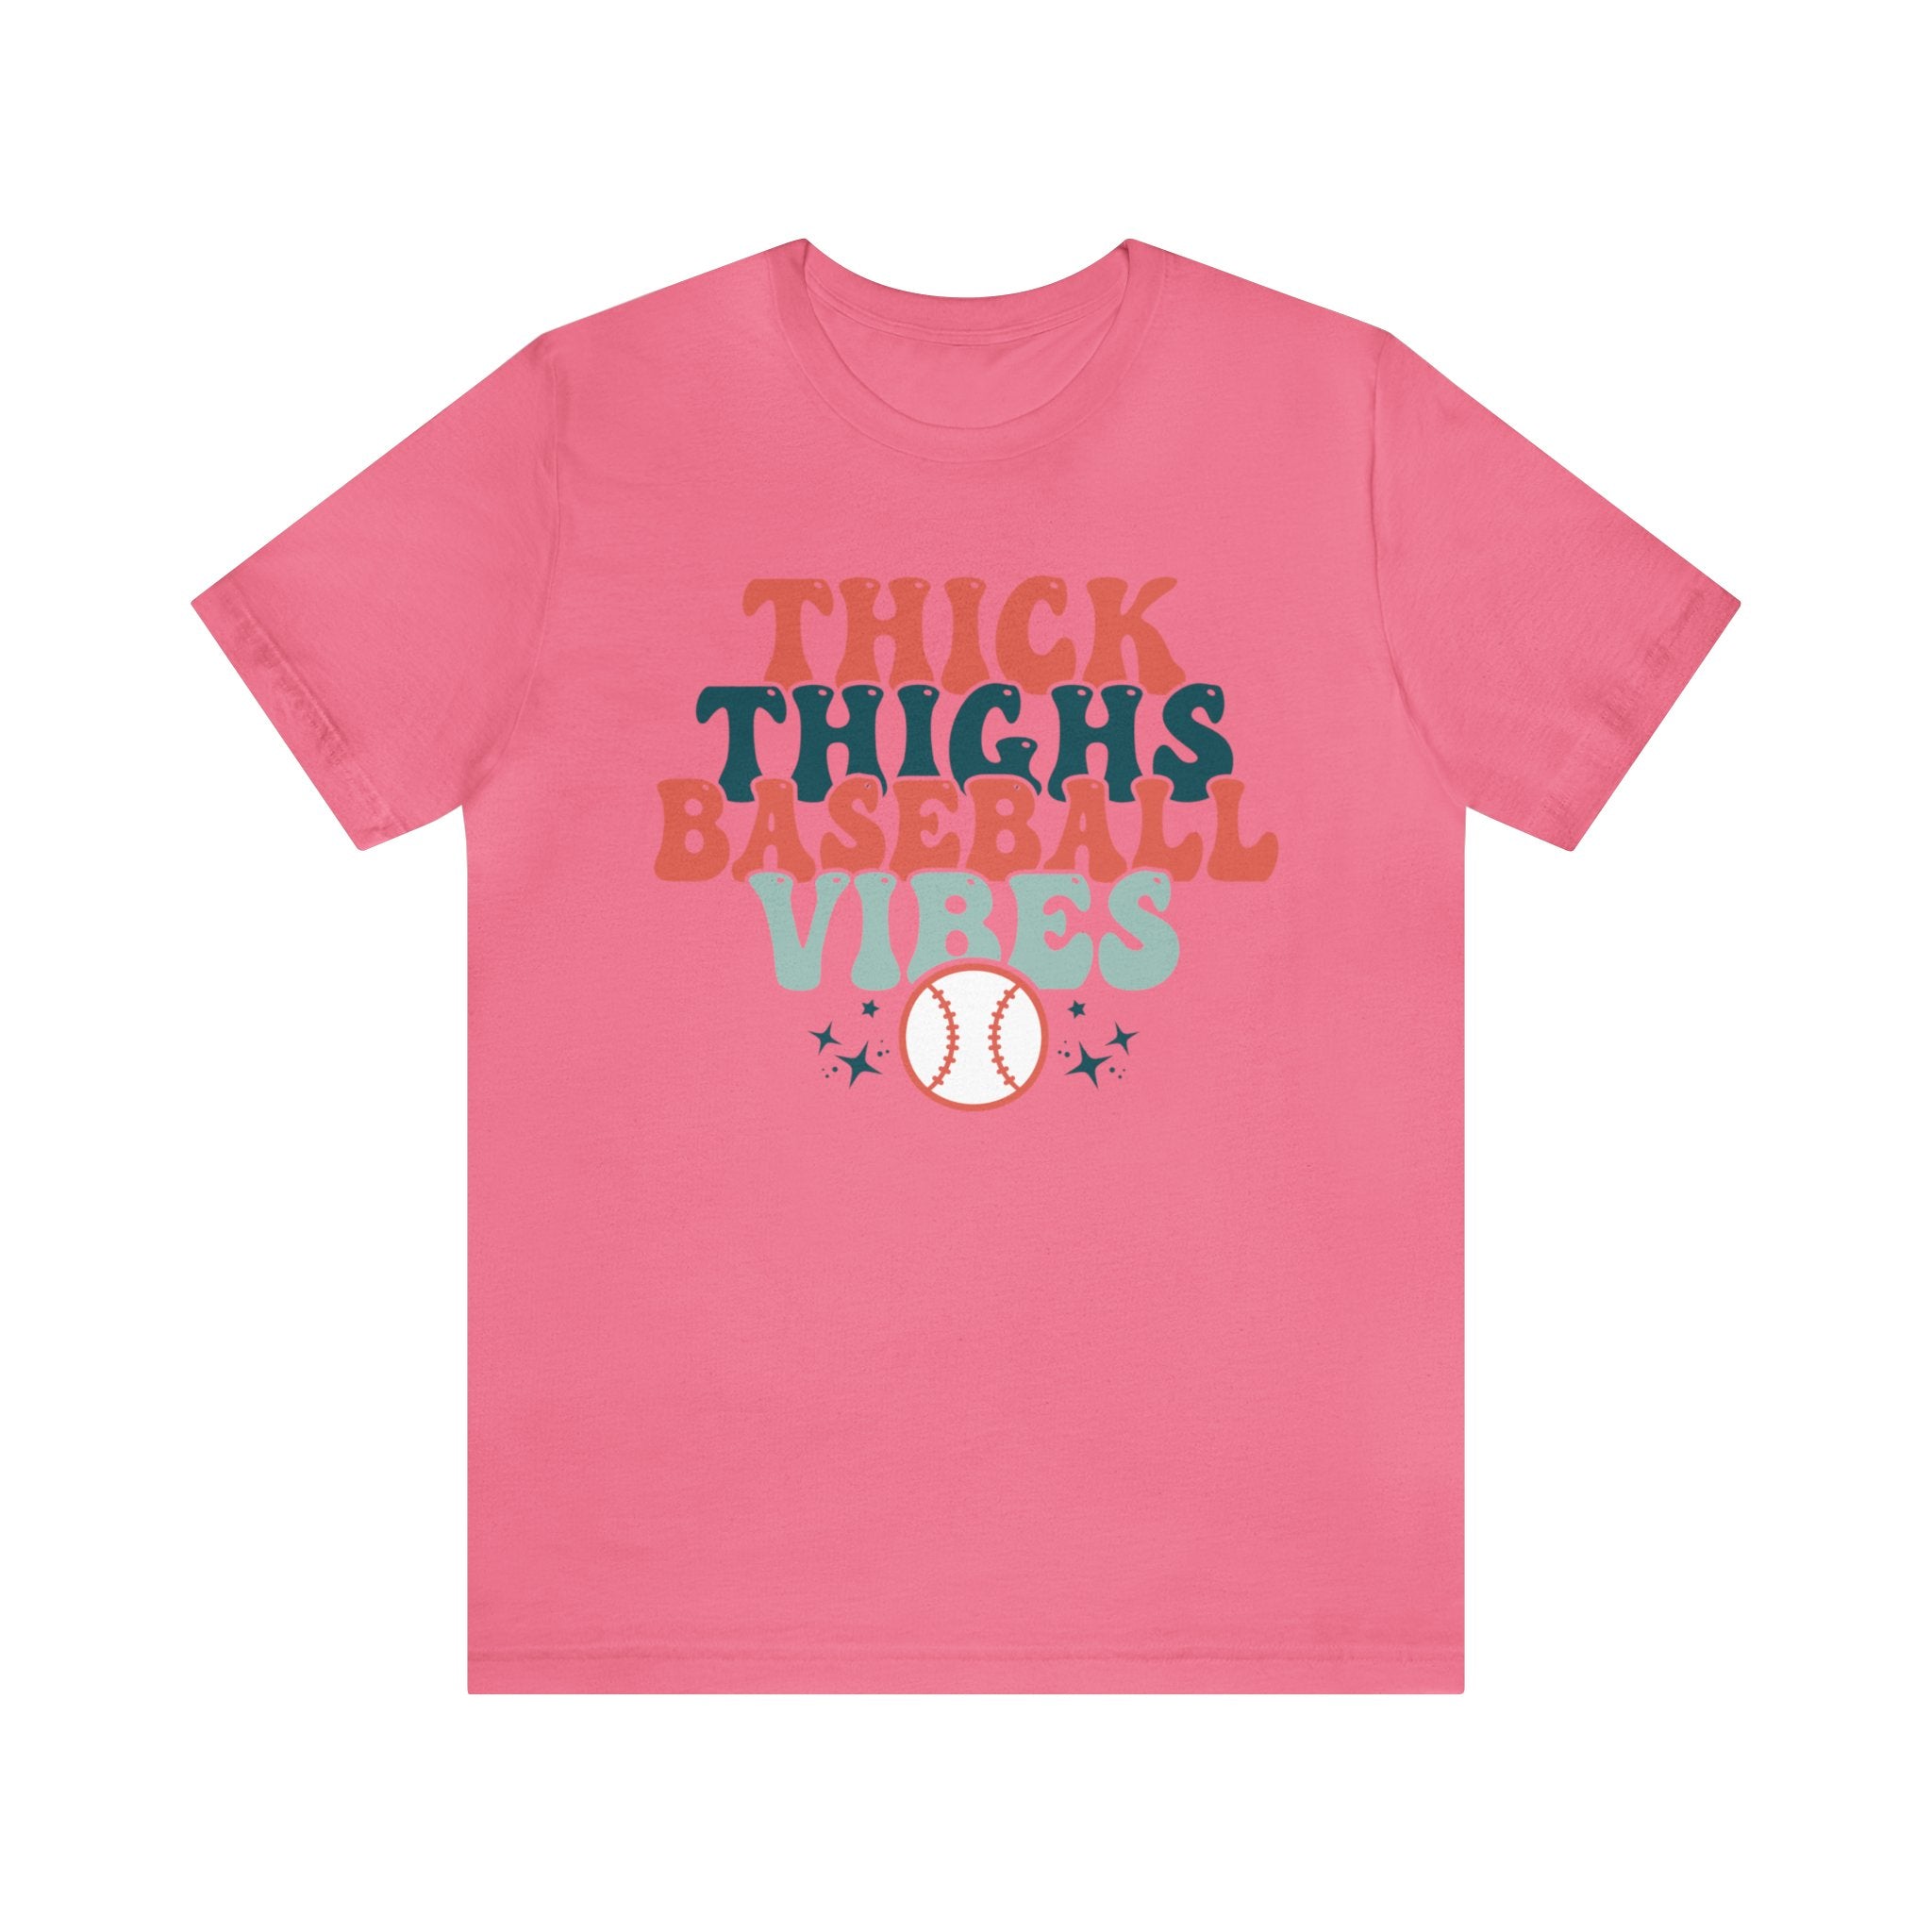 Thick Thighs Baseball Vibes